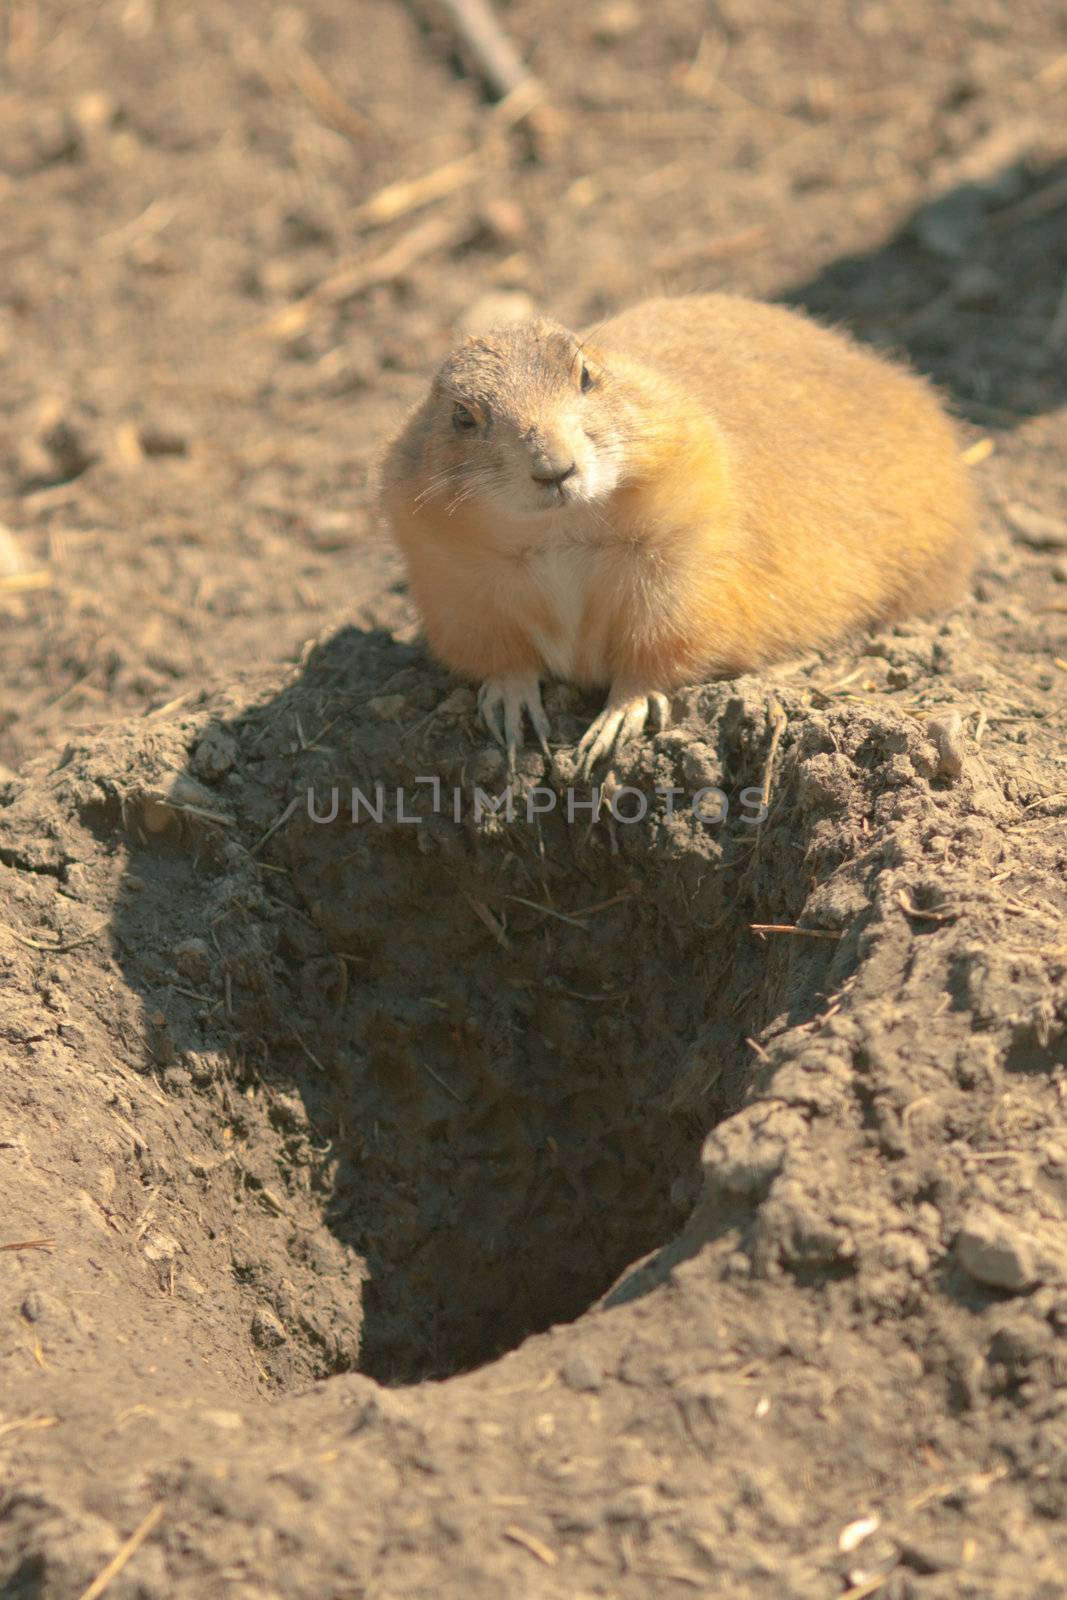 Gopher(Spermophilus dauricus) in the wild nature near the mink